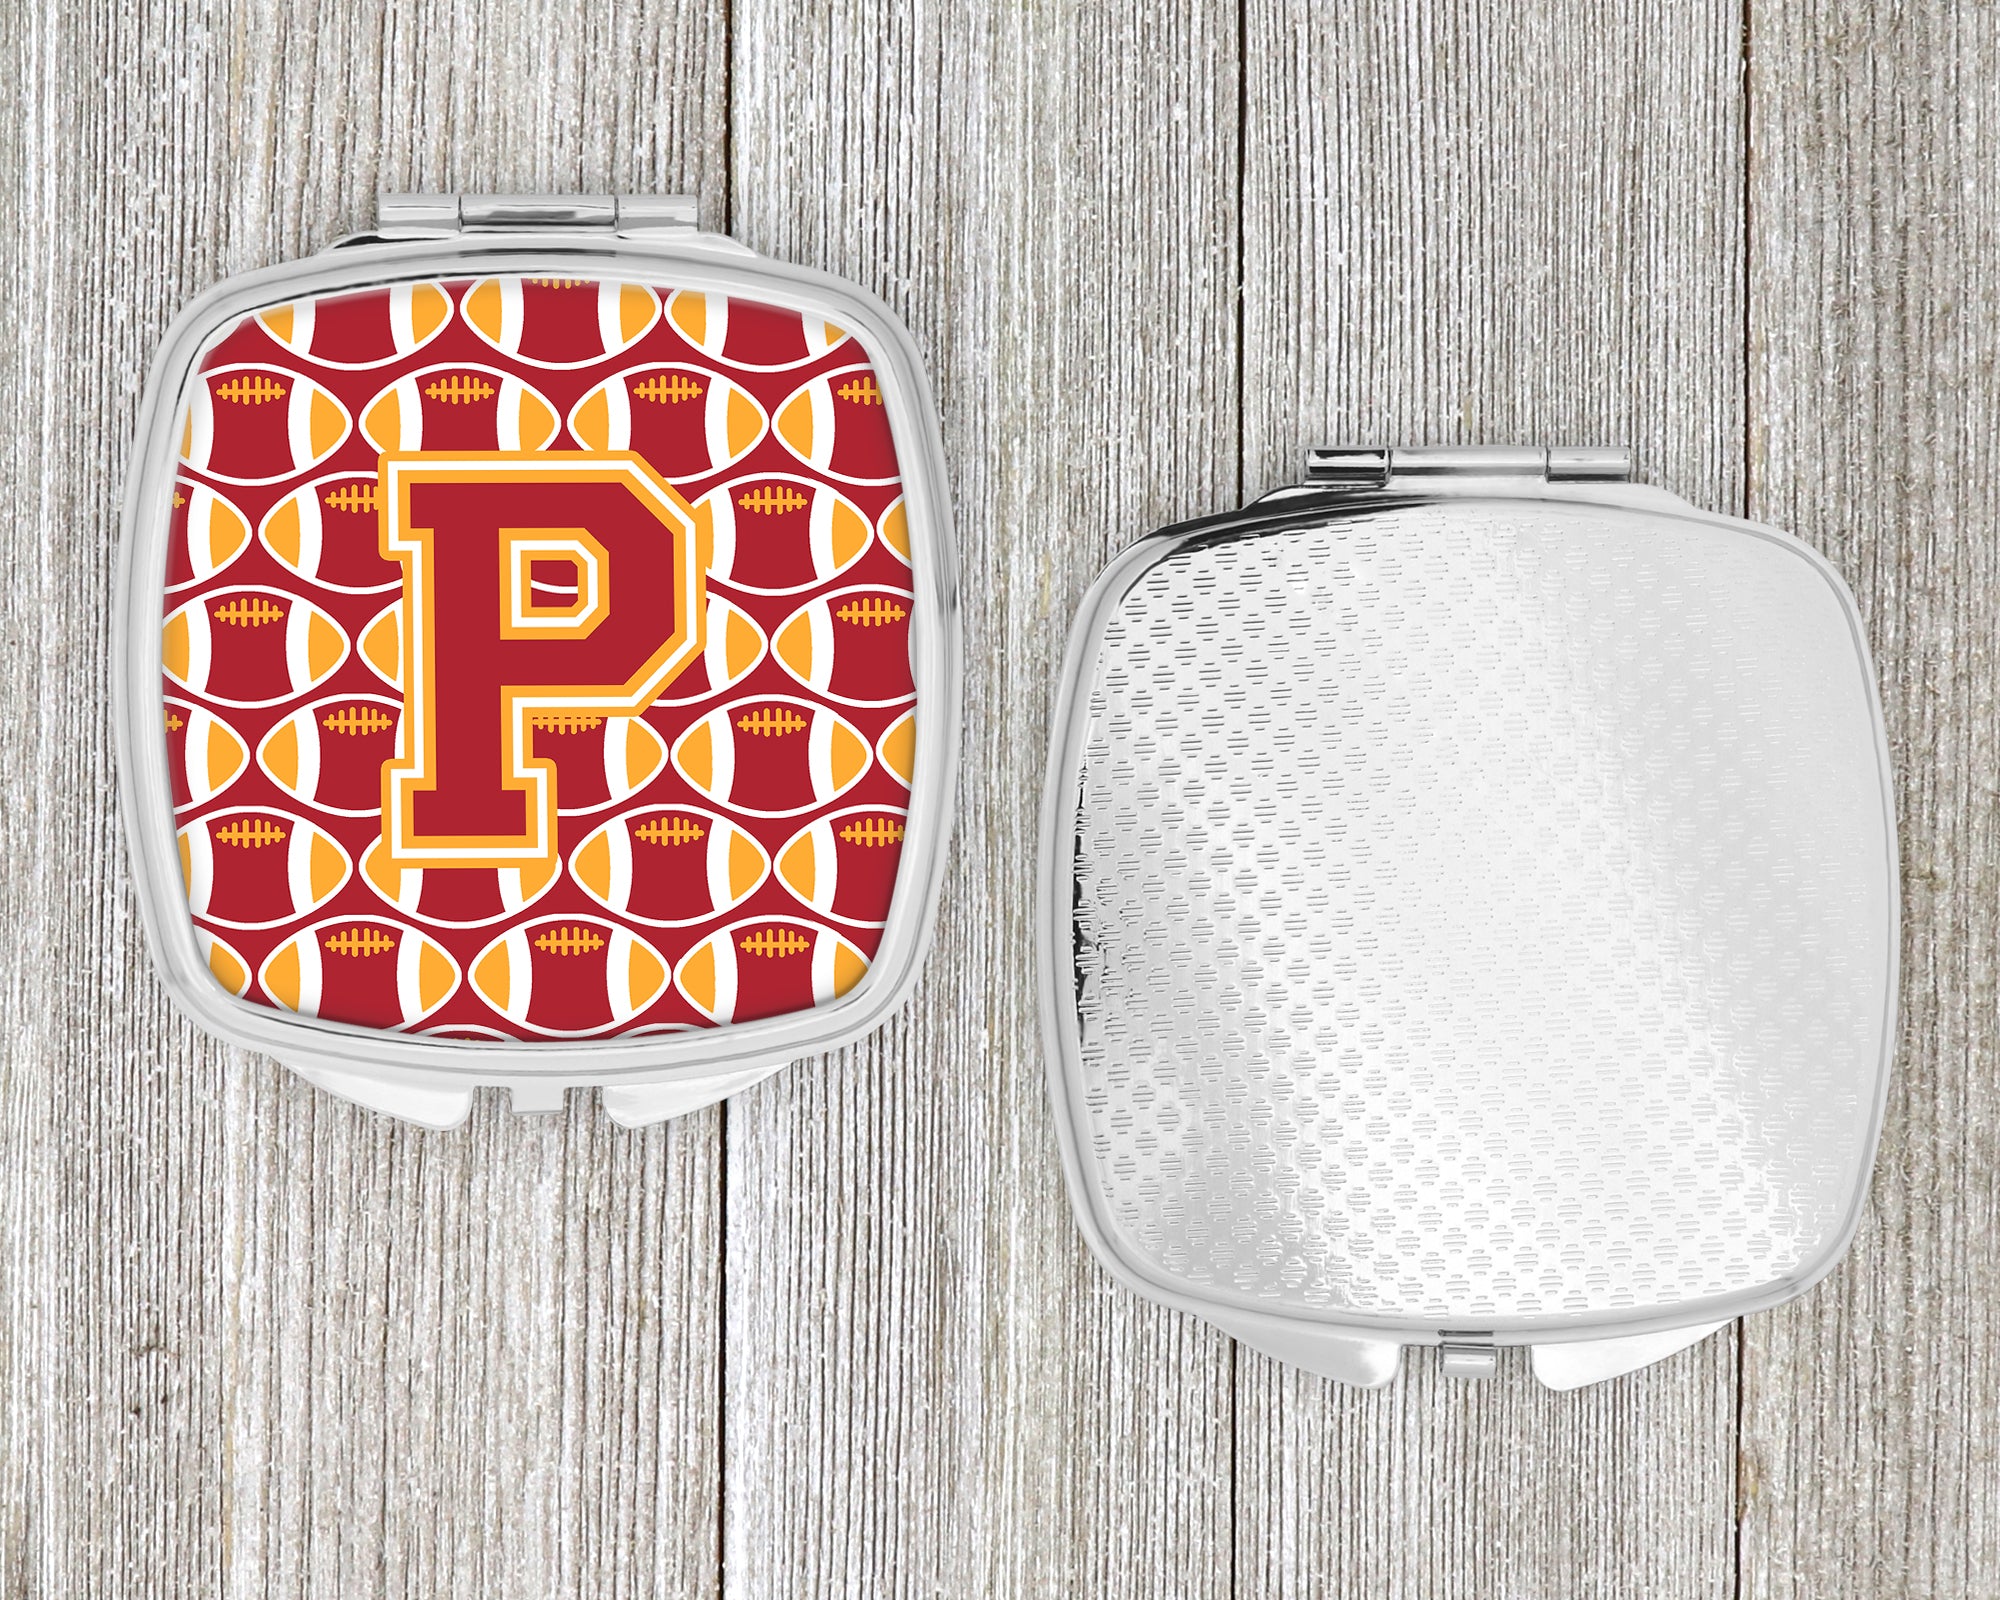 Letter P Football Cardinal and Gold Compact Mirror CJ1070-PSCM  the-store.com.